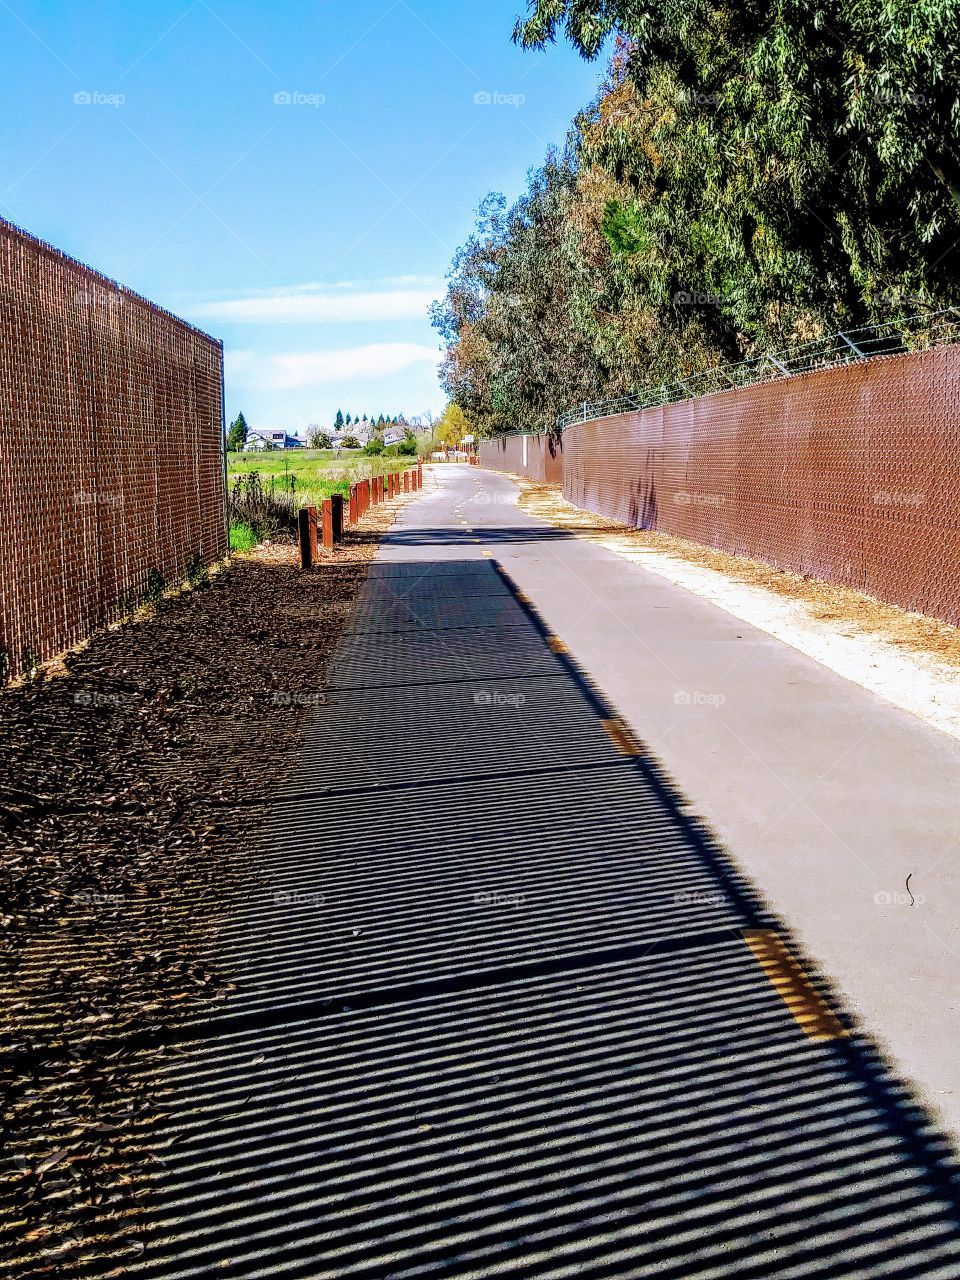 paved path with shadow of fencing covering half the path